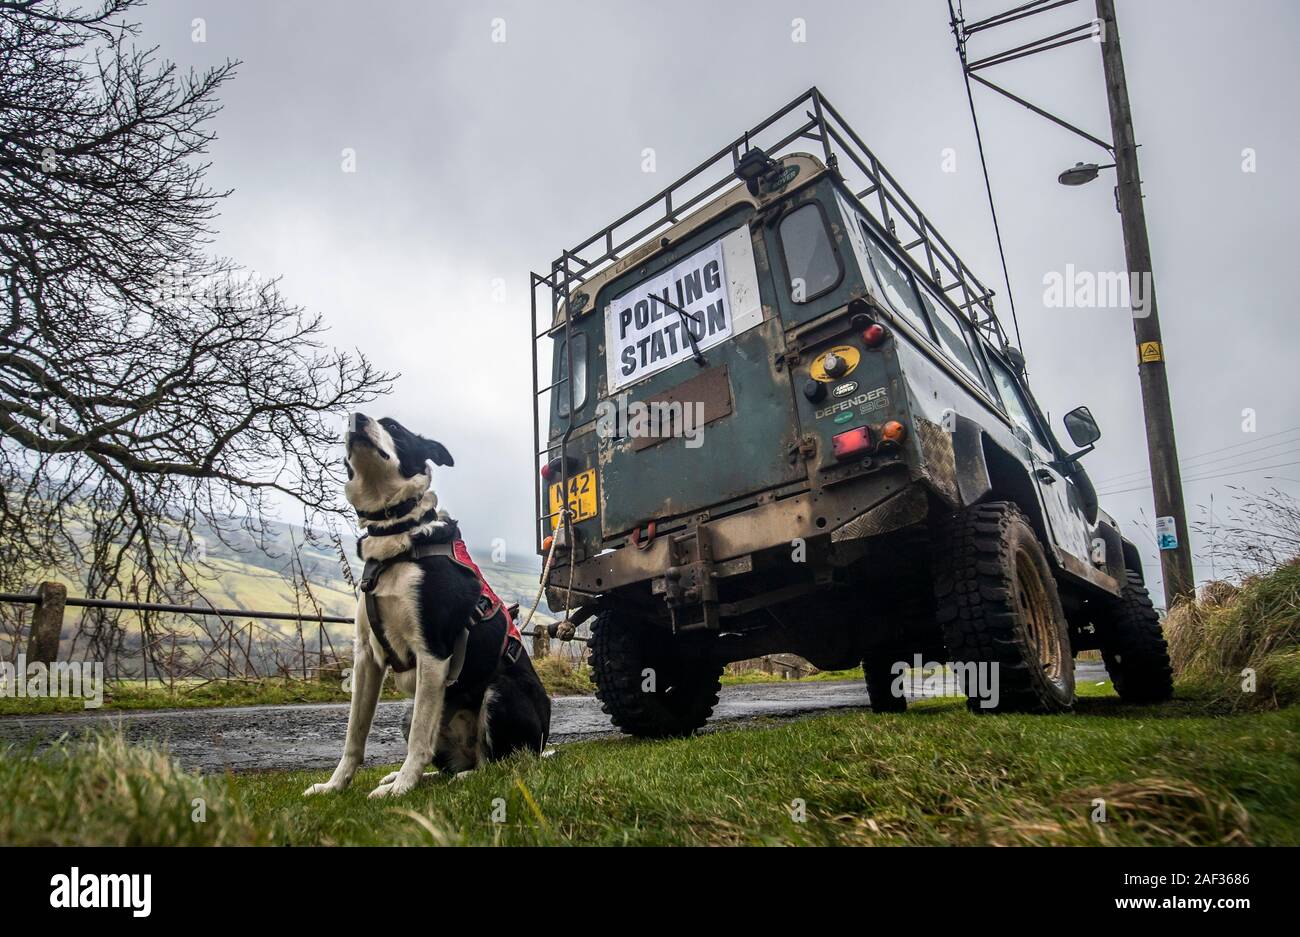 A dog next to a polling station sign on the back of a Land Rover in Low Row, Yorkshire, as voters go to the polls in what has been billed as the most important General Election in a generation. Stock Photo